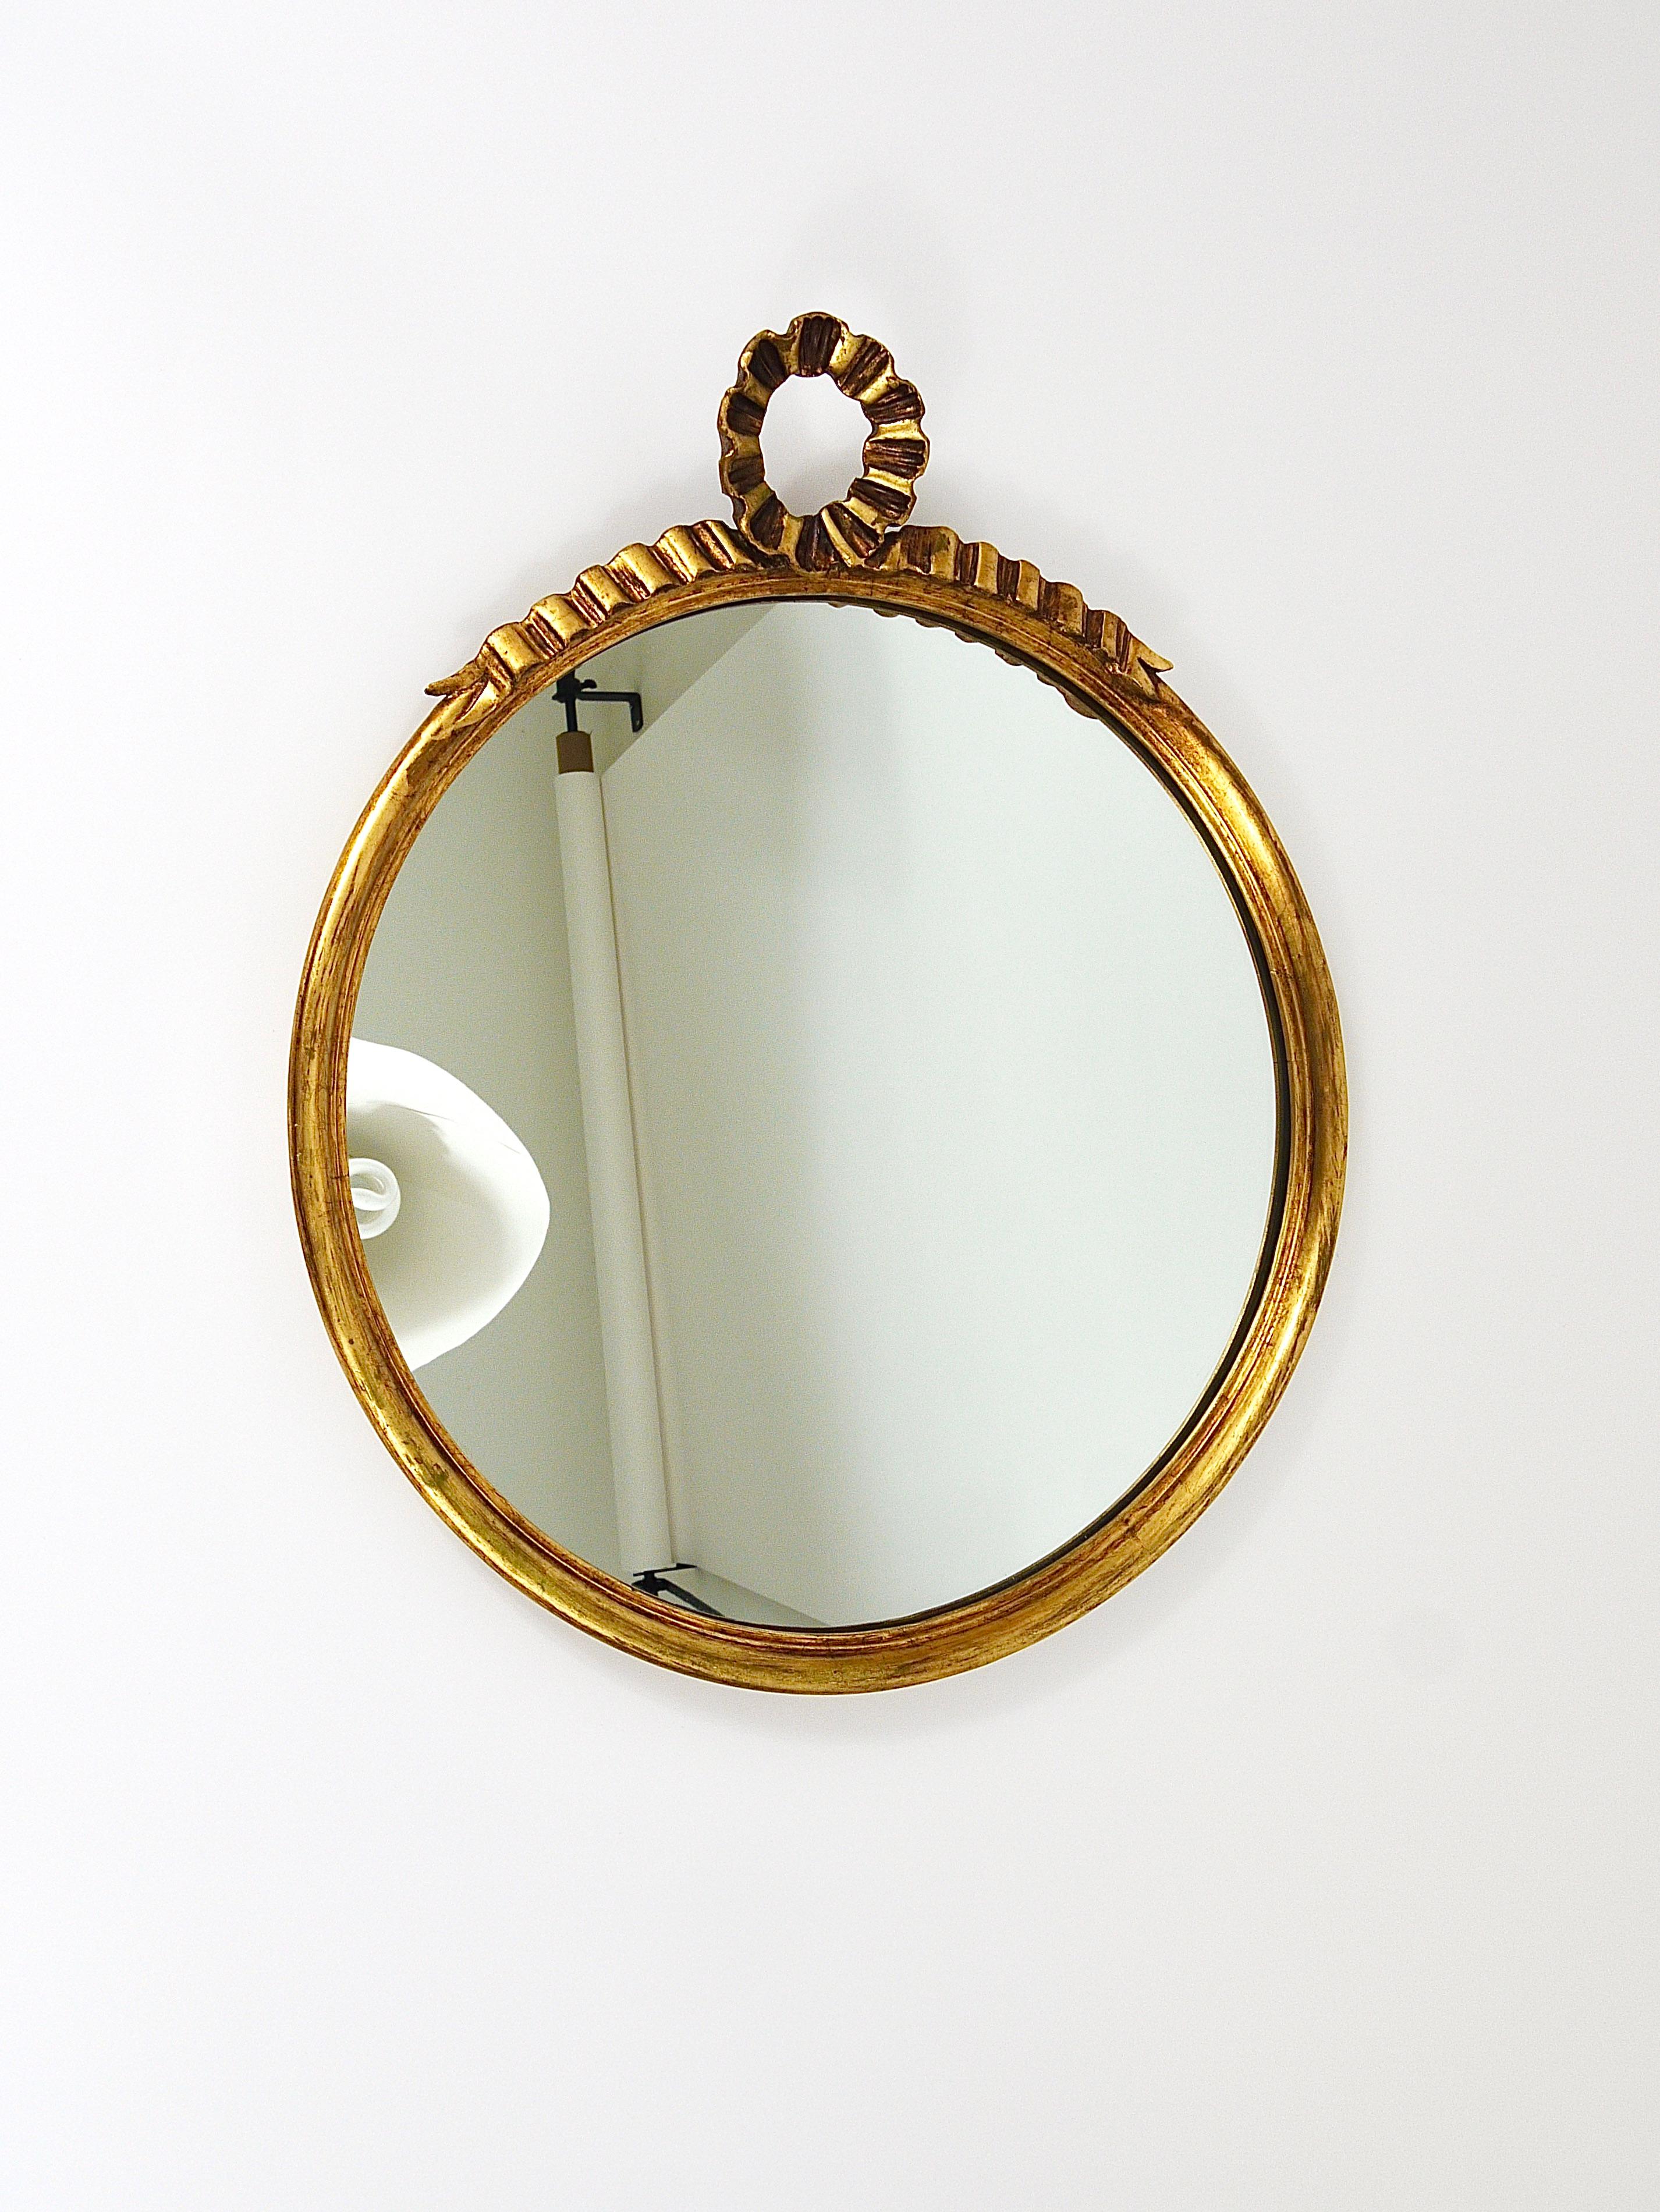 A absolutely lovely golden Hollywood Regency wall mirror from the 1950s, executed by C. Allodi & G. Subelli. Made in Cremona, Italy. Made of hand-carved gold-plated wood, in excellent condition. Labelled on its backside. 